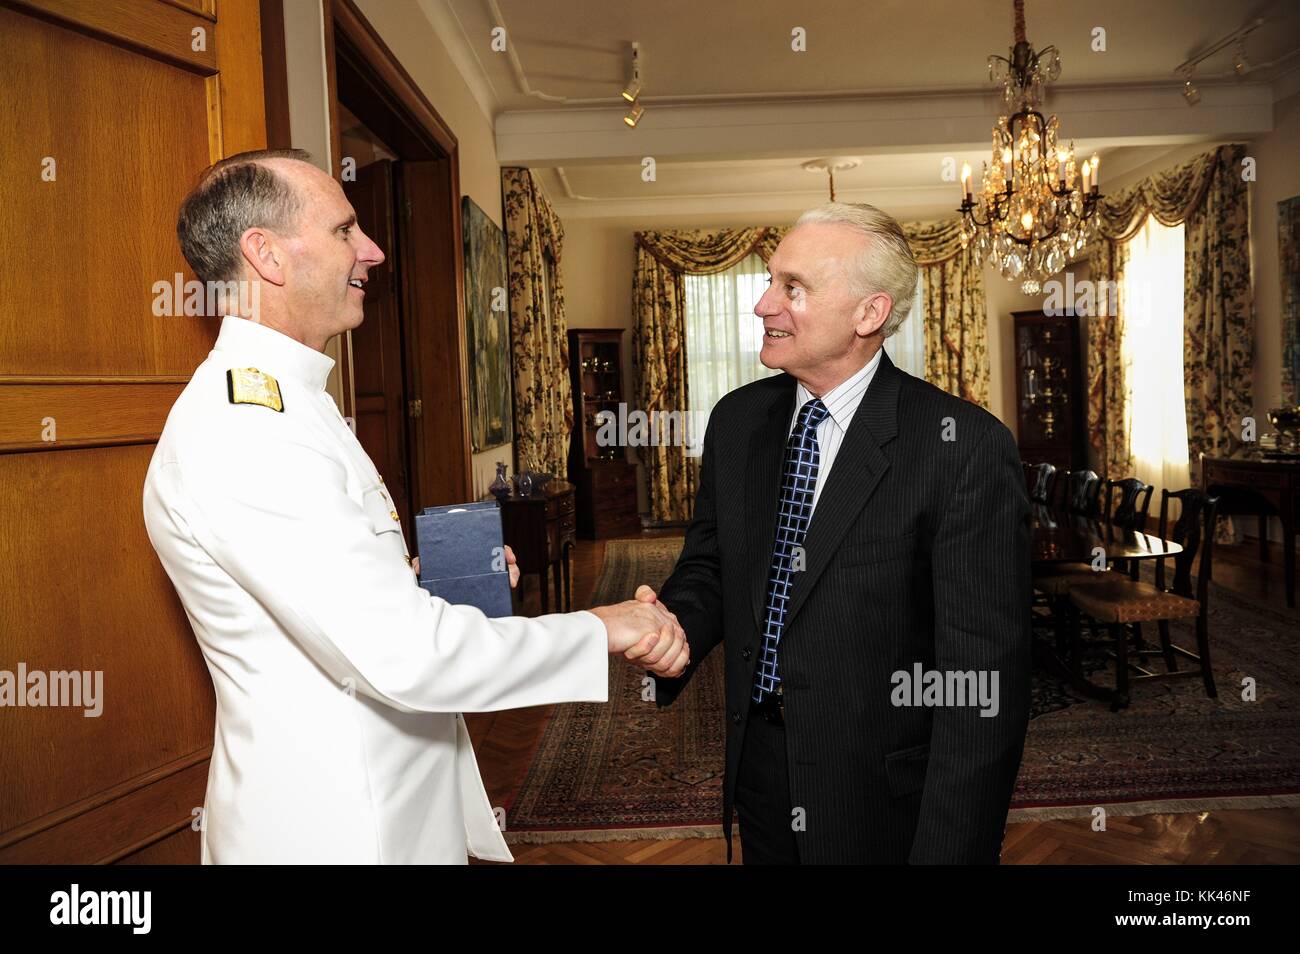 Chief of Naval Operations CNO Admiral Jonathan Greenert, left, meets with the US, Ankara, Turkey, 2012. Image courtesy Mass Communication Specialist 1st Class Peter D. Lawlor/US Navy. Stock Photo